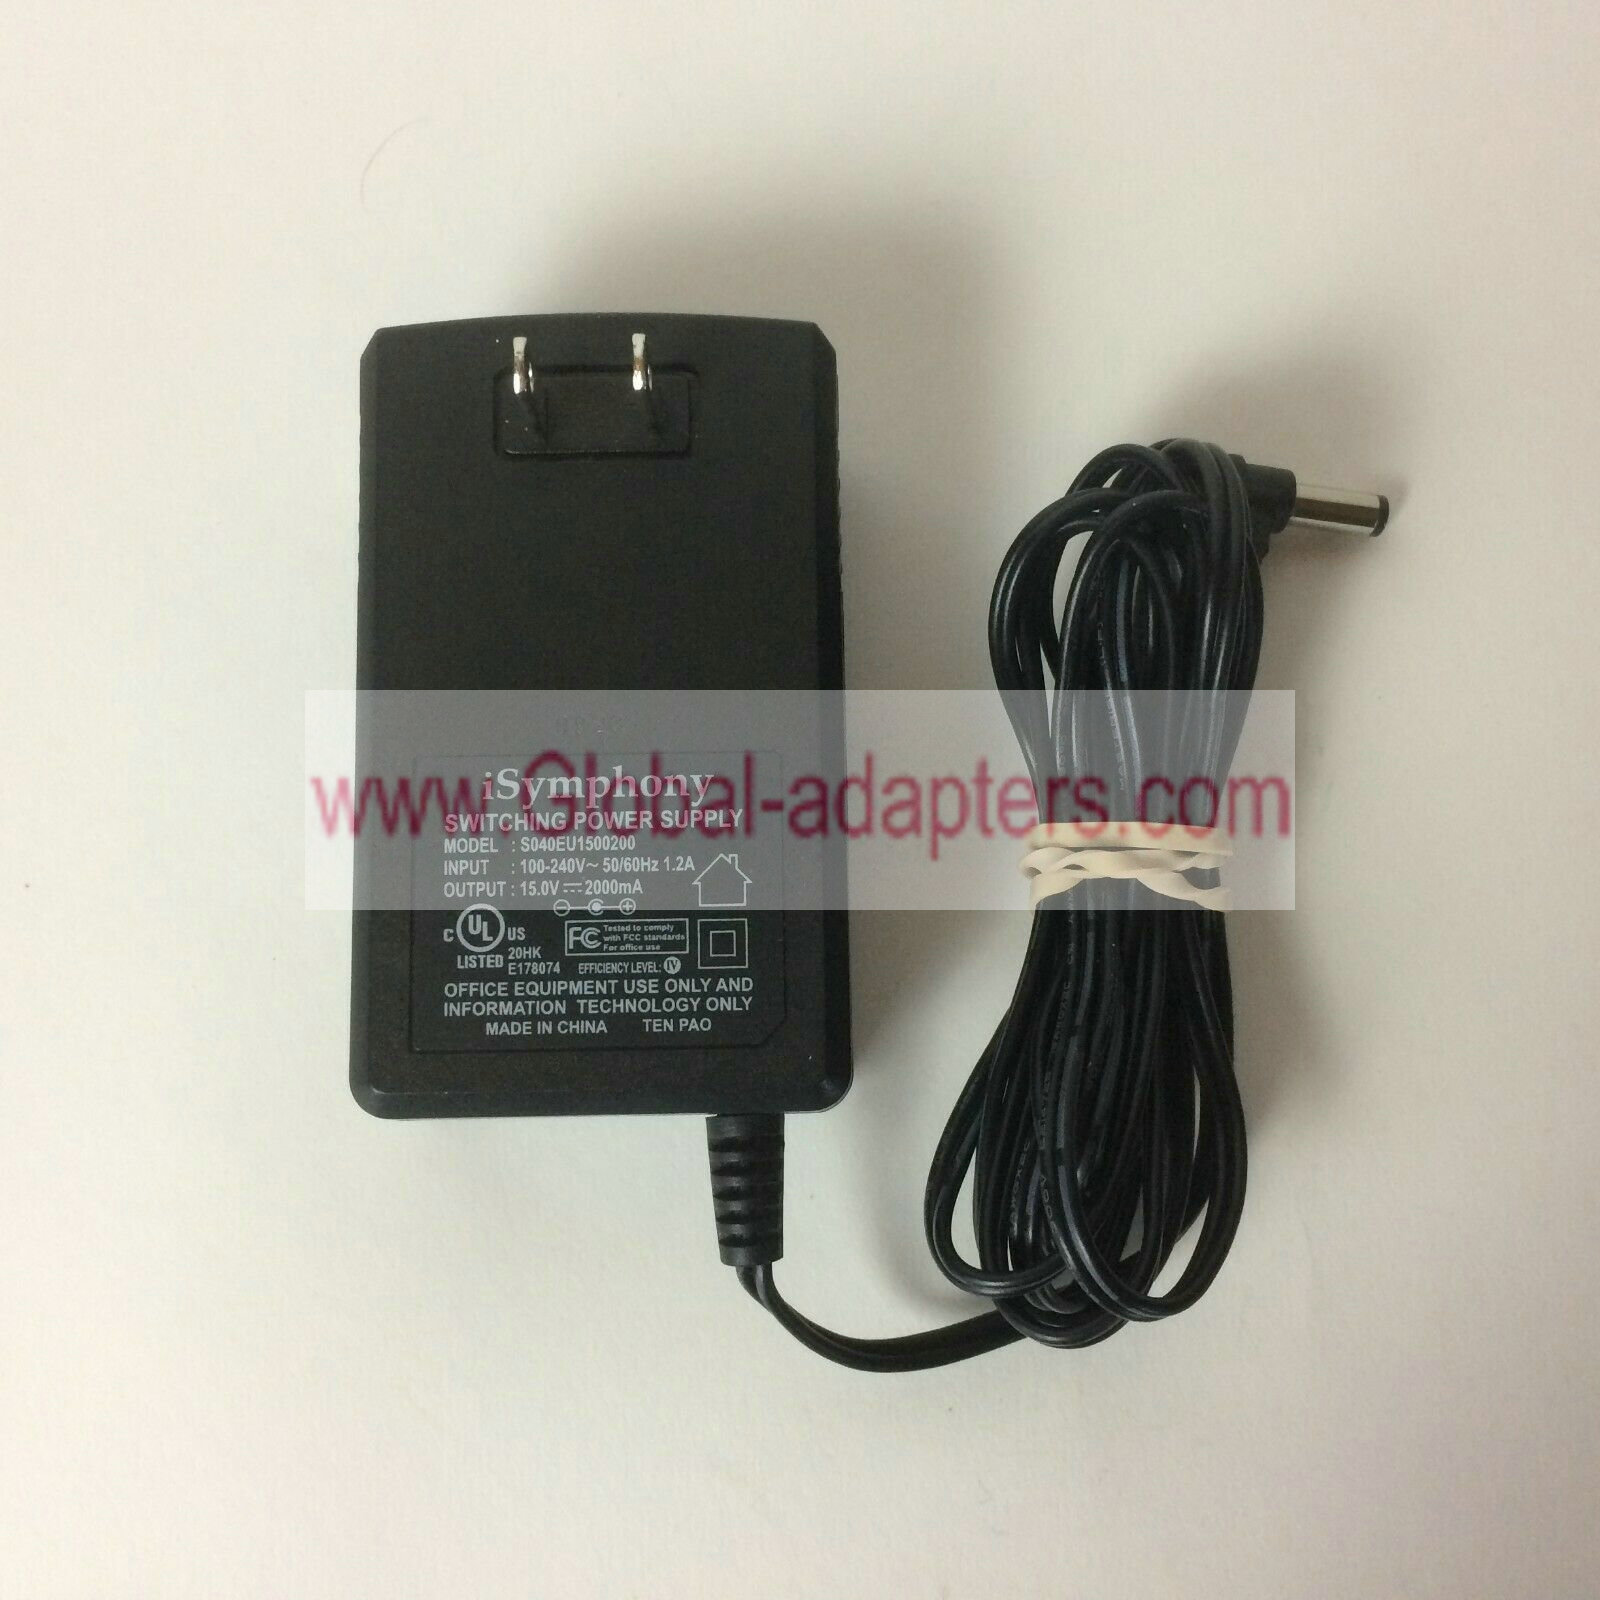 Brand new iSymphony S040EU1500200 Switching Power Supply AC Adapter 15.0V 2000mA